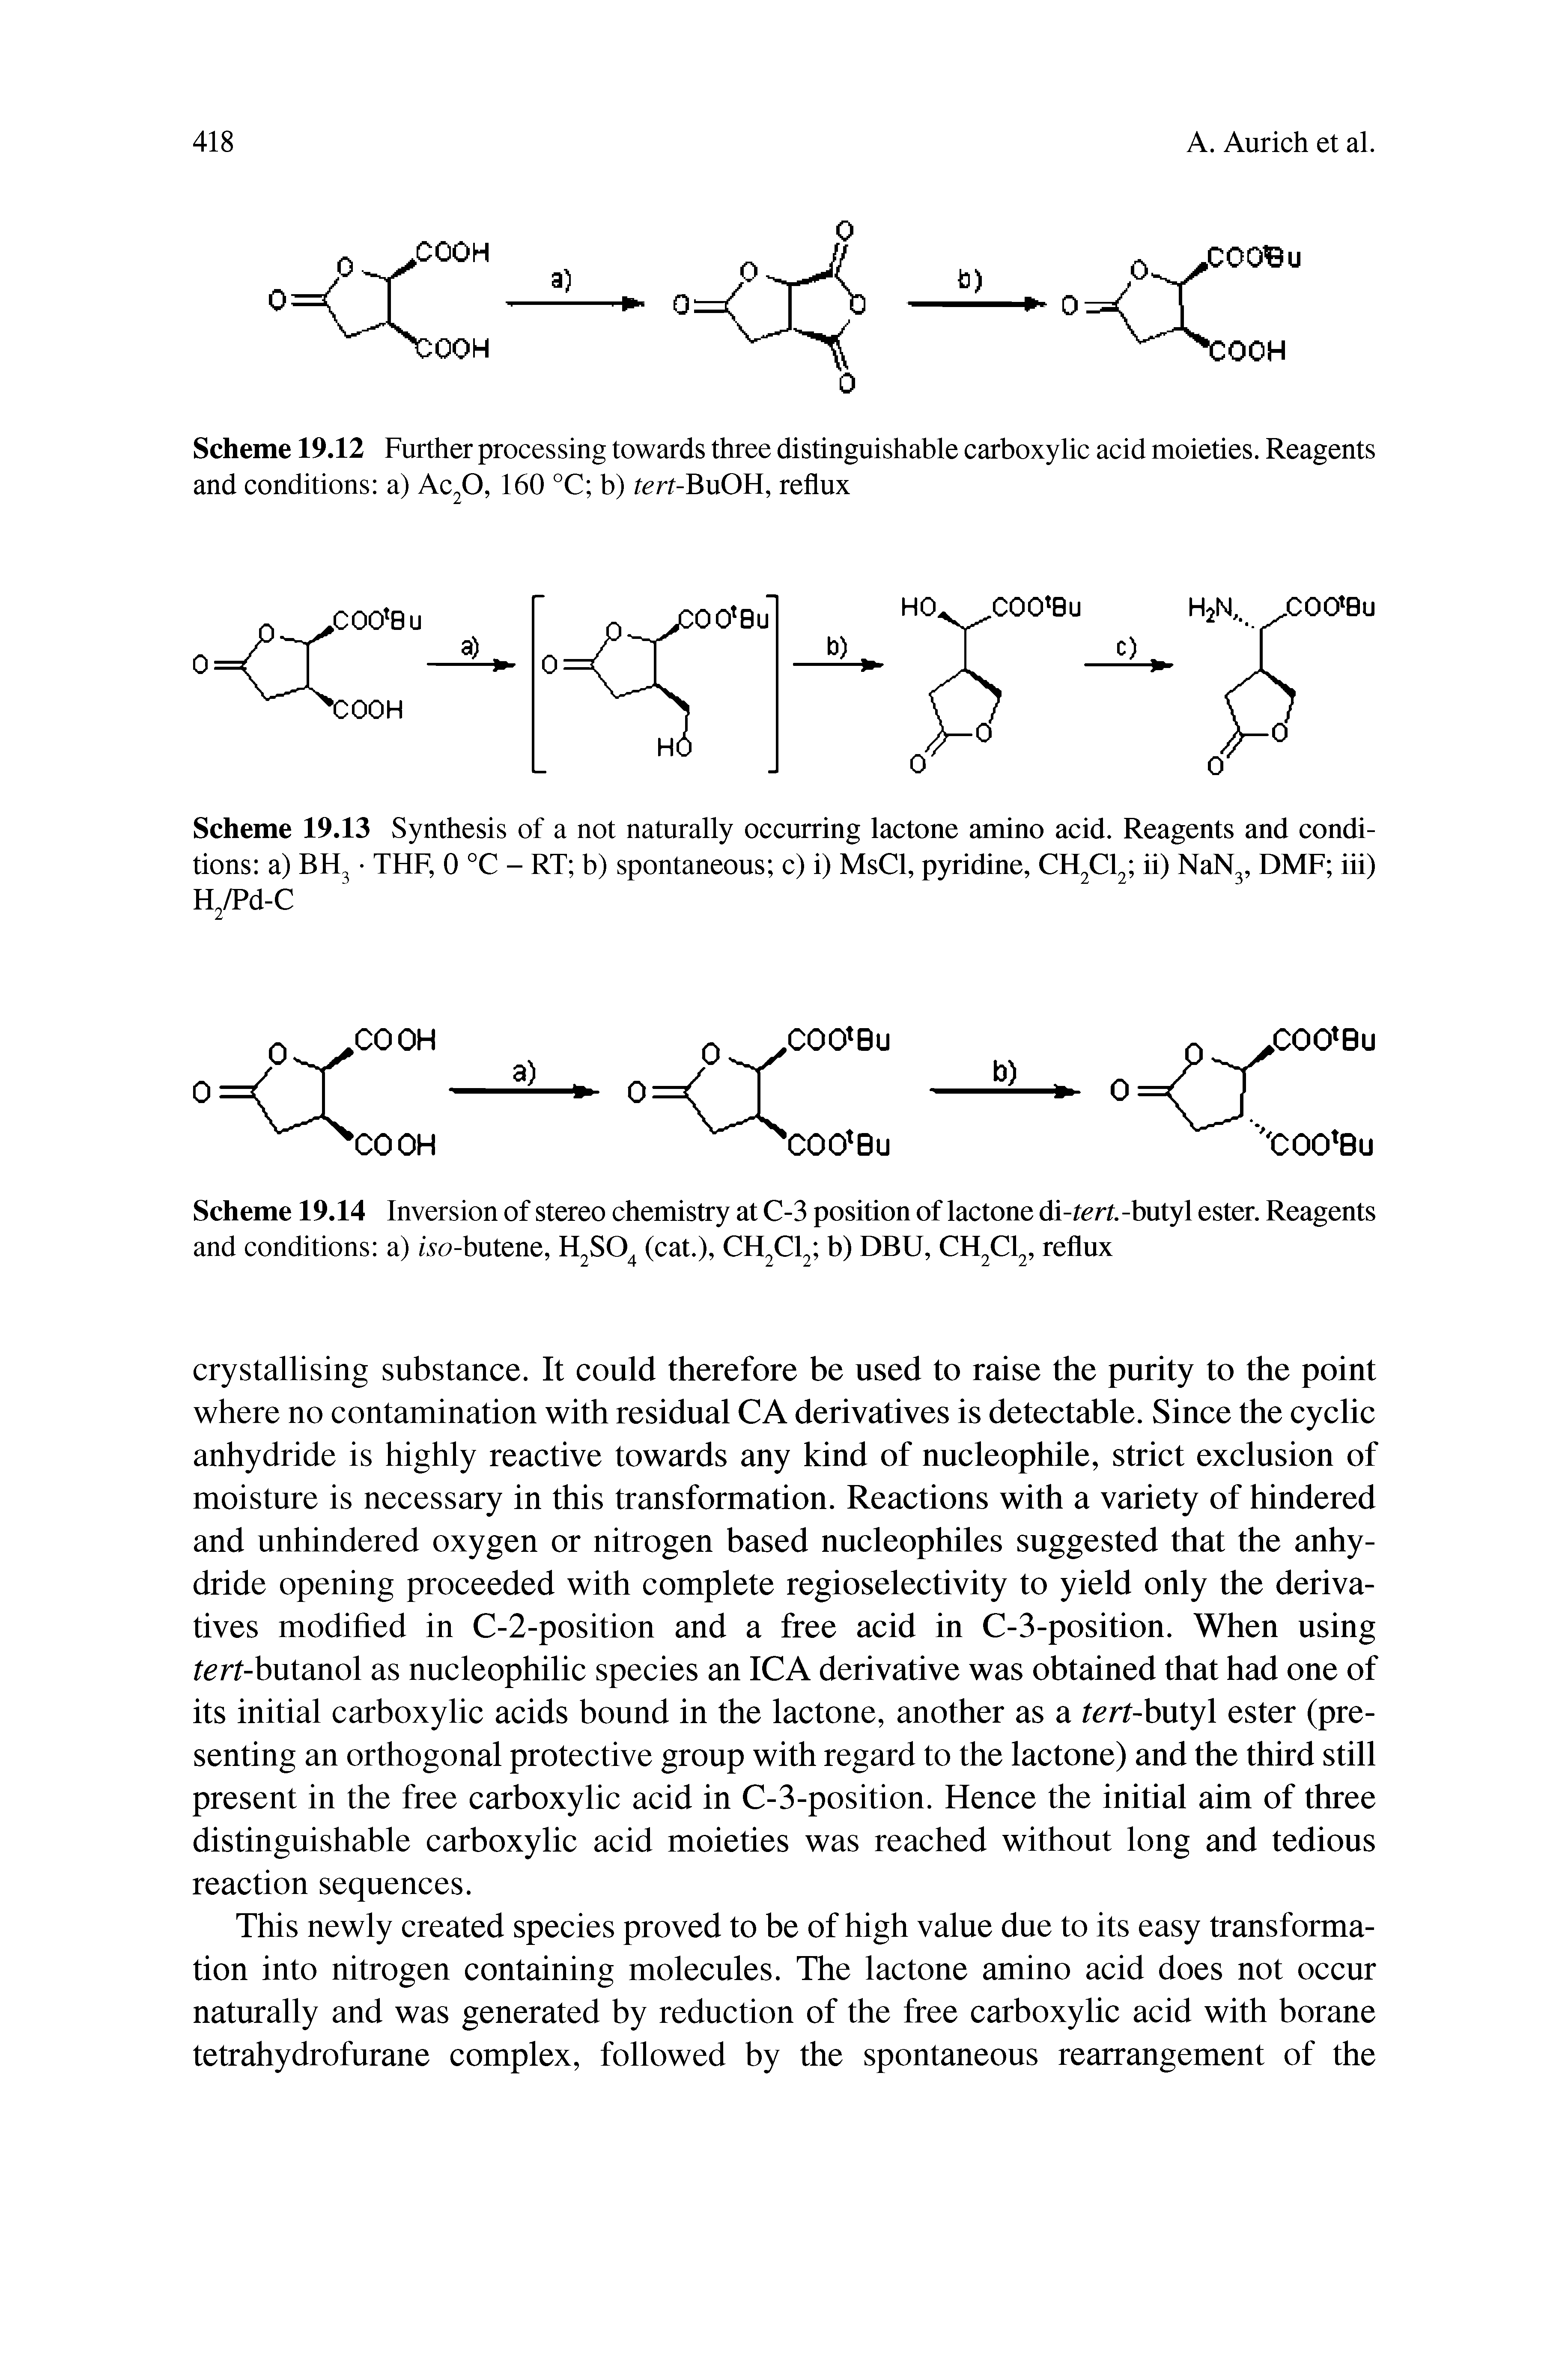 Scheme 19.13 Synthesis of a not naturally occurring lactone amino acid. Reagents and conditions a) BH3 THF, 0 °C - RT b) spontaneous c) i) MsCl, pyridine, CH2CI2 ii) NaN3, DMF iii) R/Pd-C...